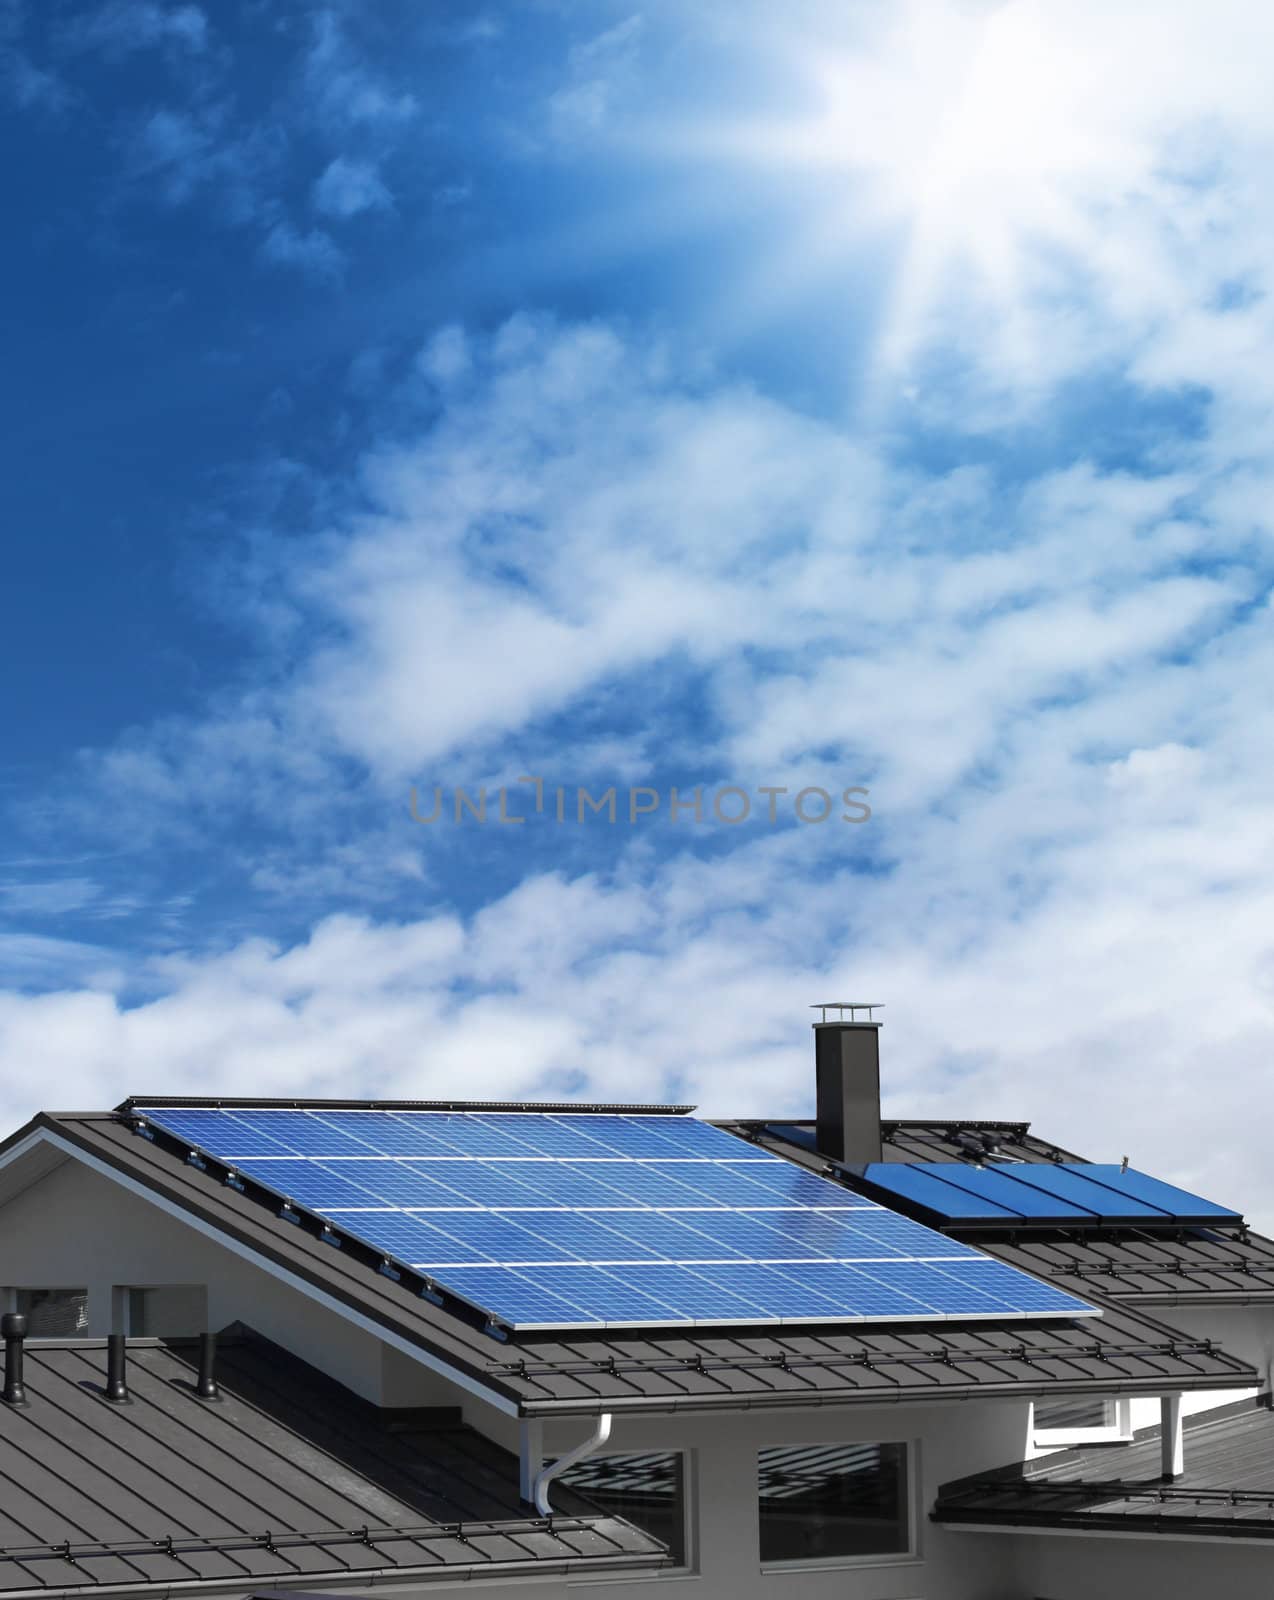 Solar panels on house rooftop by anterovium